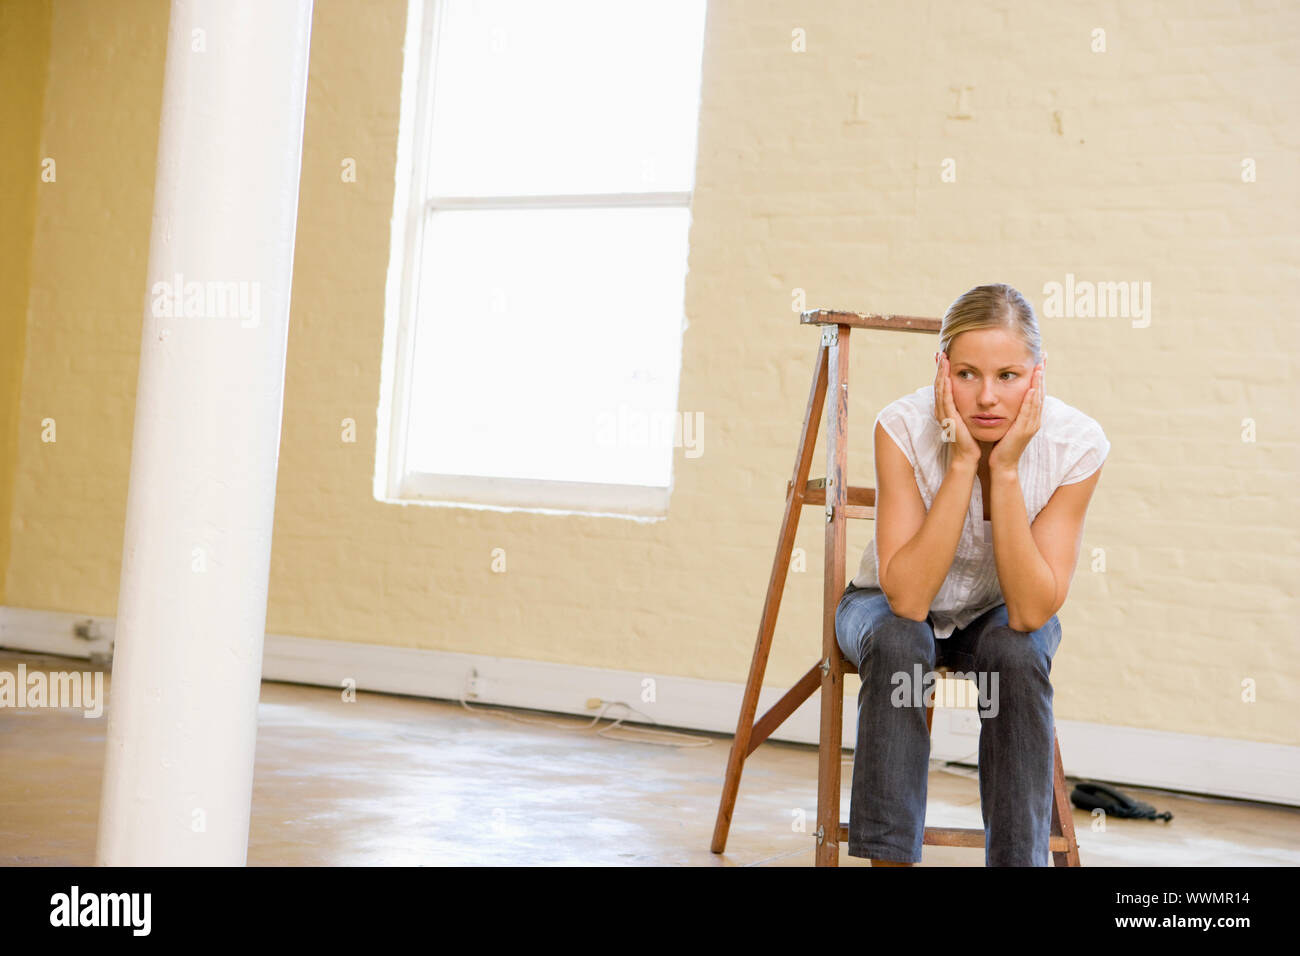 Woman sitting on ladder in empty space looking bored Stock Photo